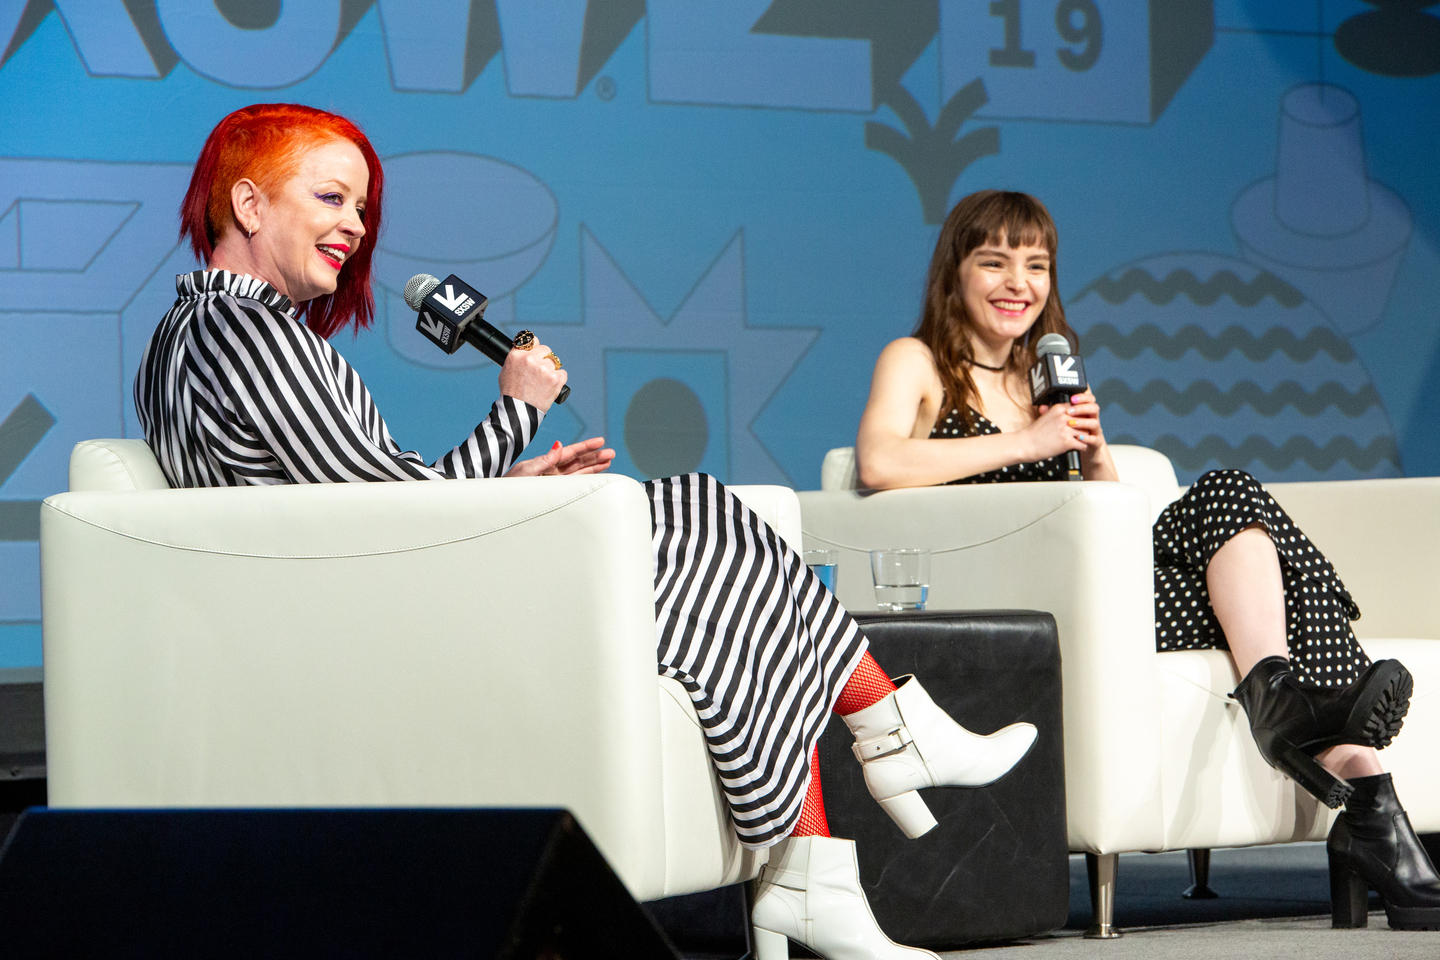 Shirley Manson and Lauren Mayberry at their Music Keynote – Photo by Errich Petersen